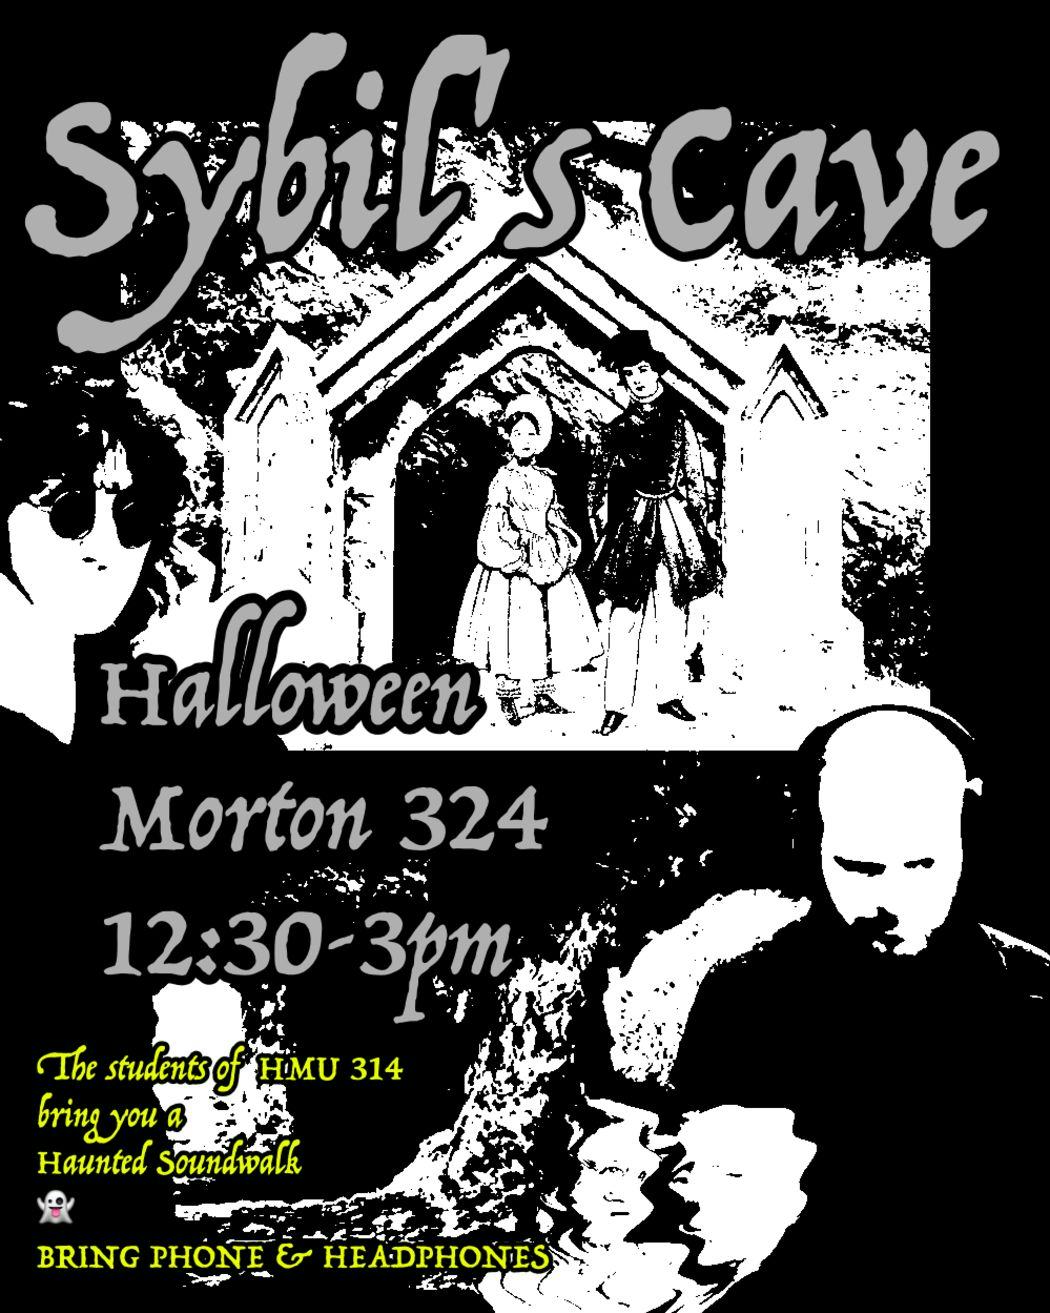 Spooky poster advertising Sybil's Cave